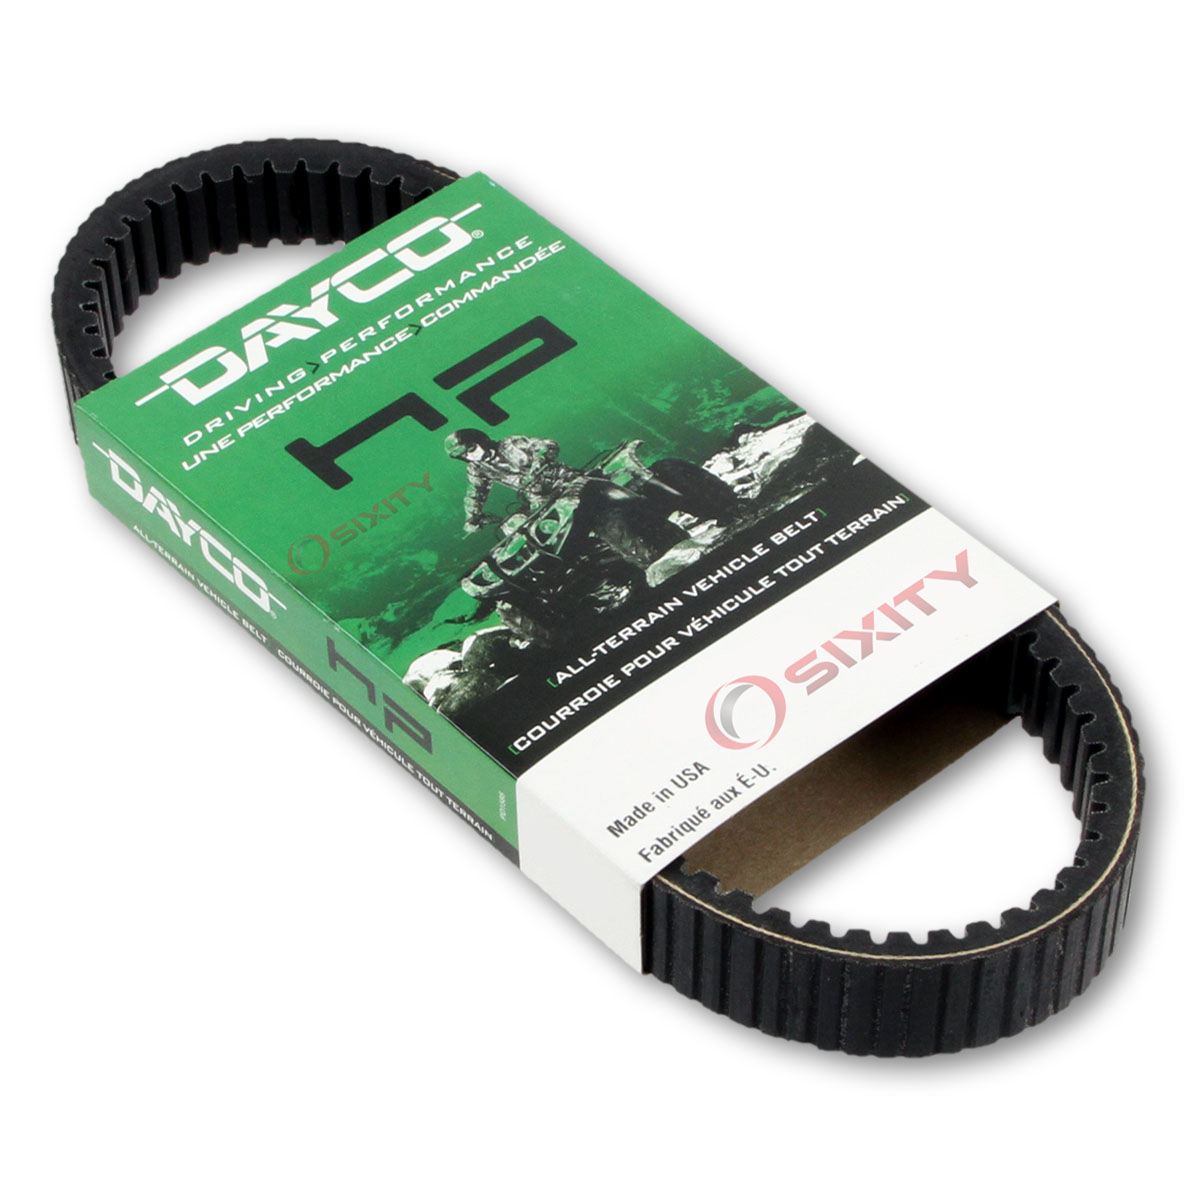 2017000067 Dayco HP Drive Belt for 2000-2009 Arctic Cat 500 4 sku 2017000067